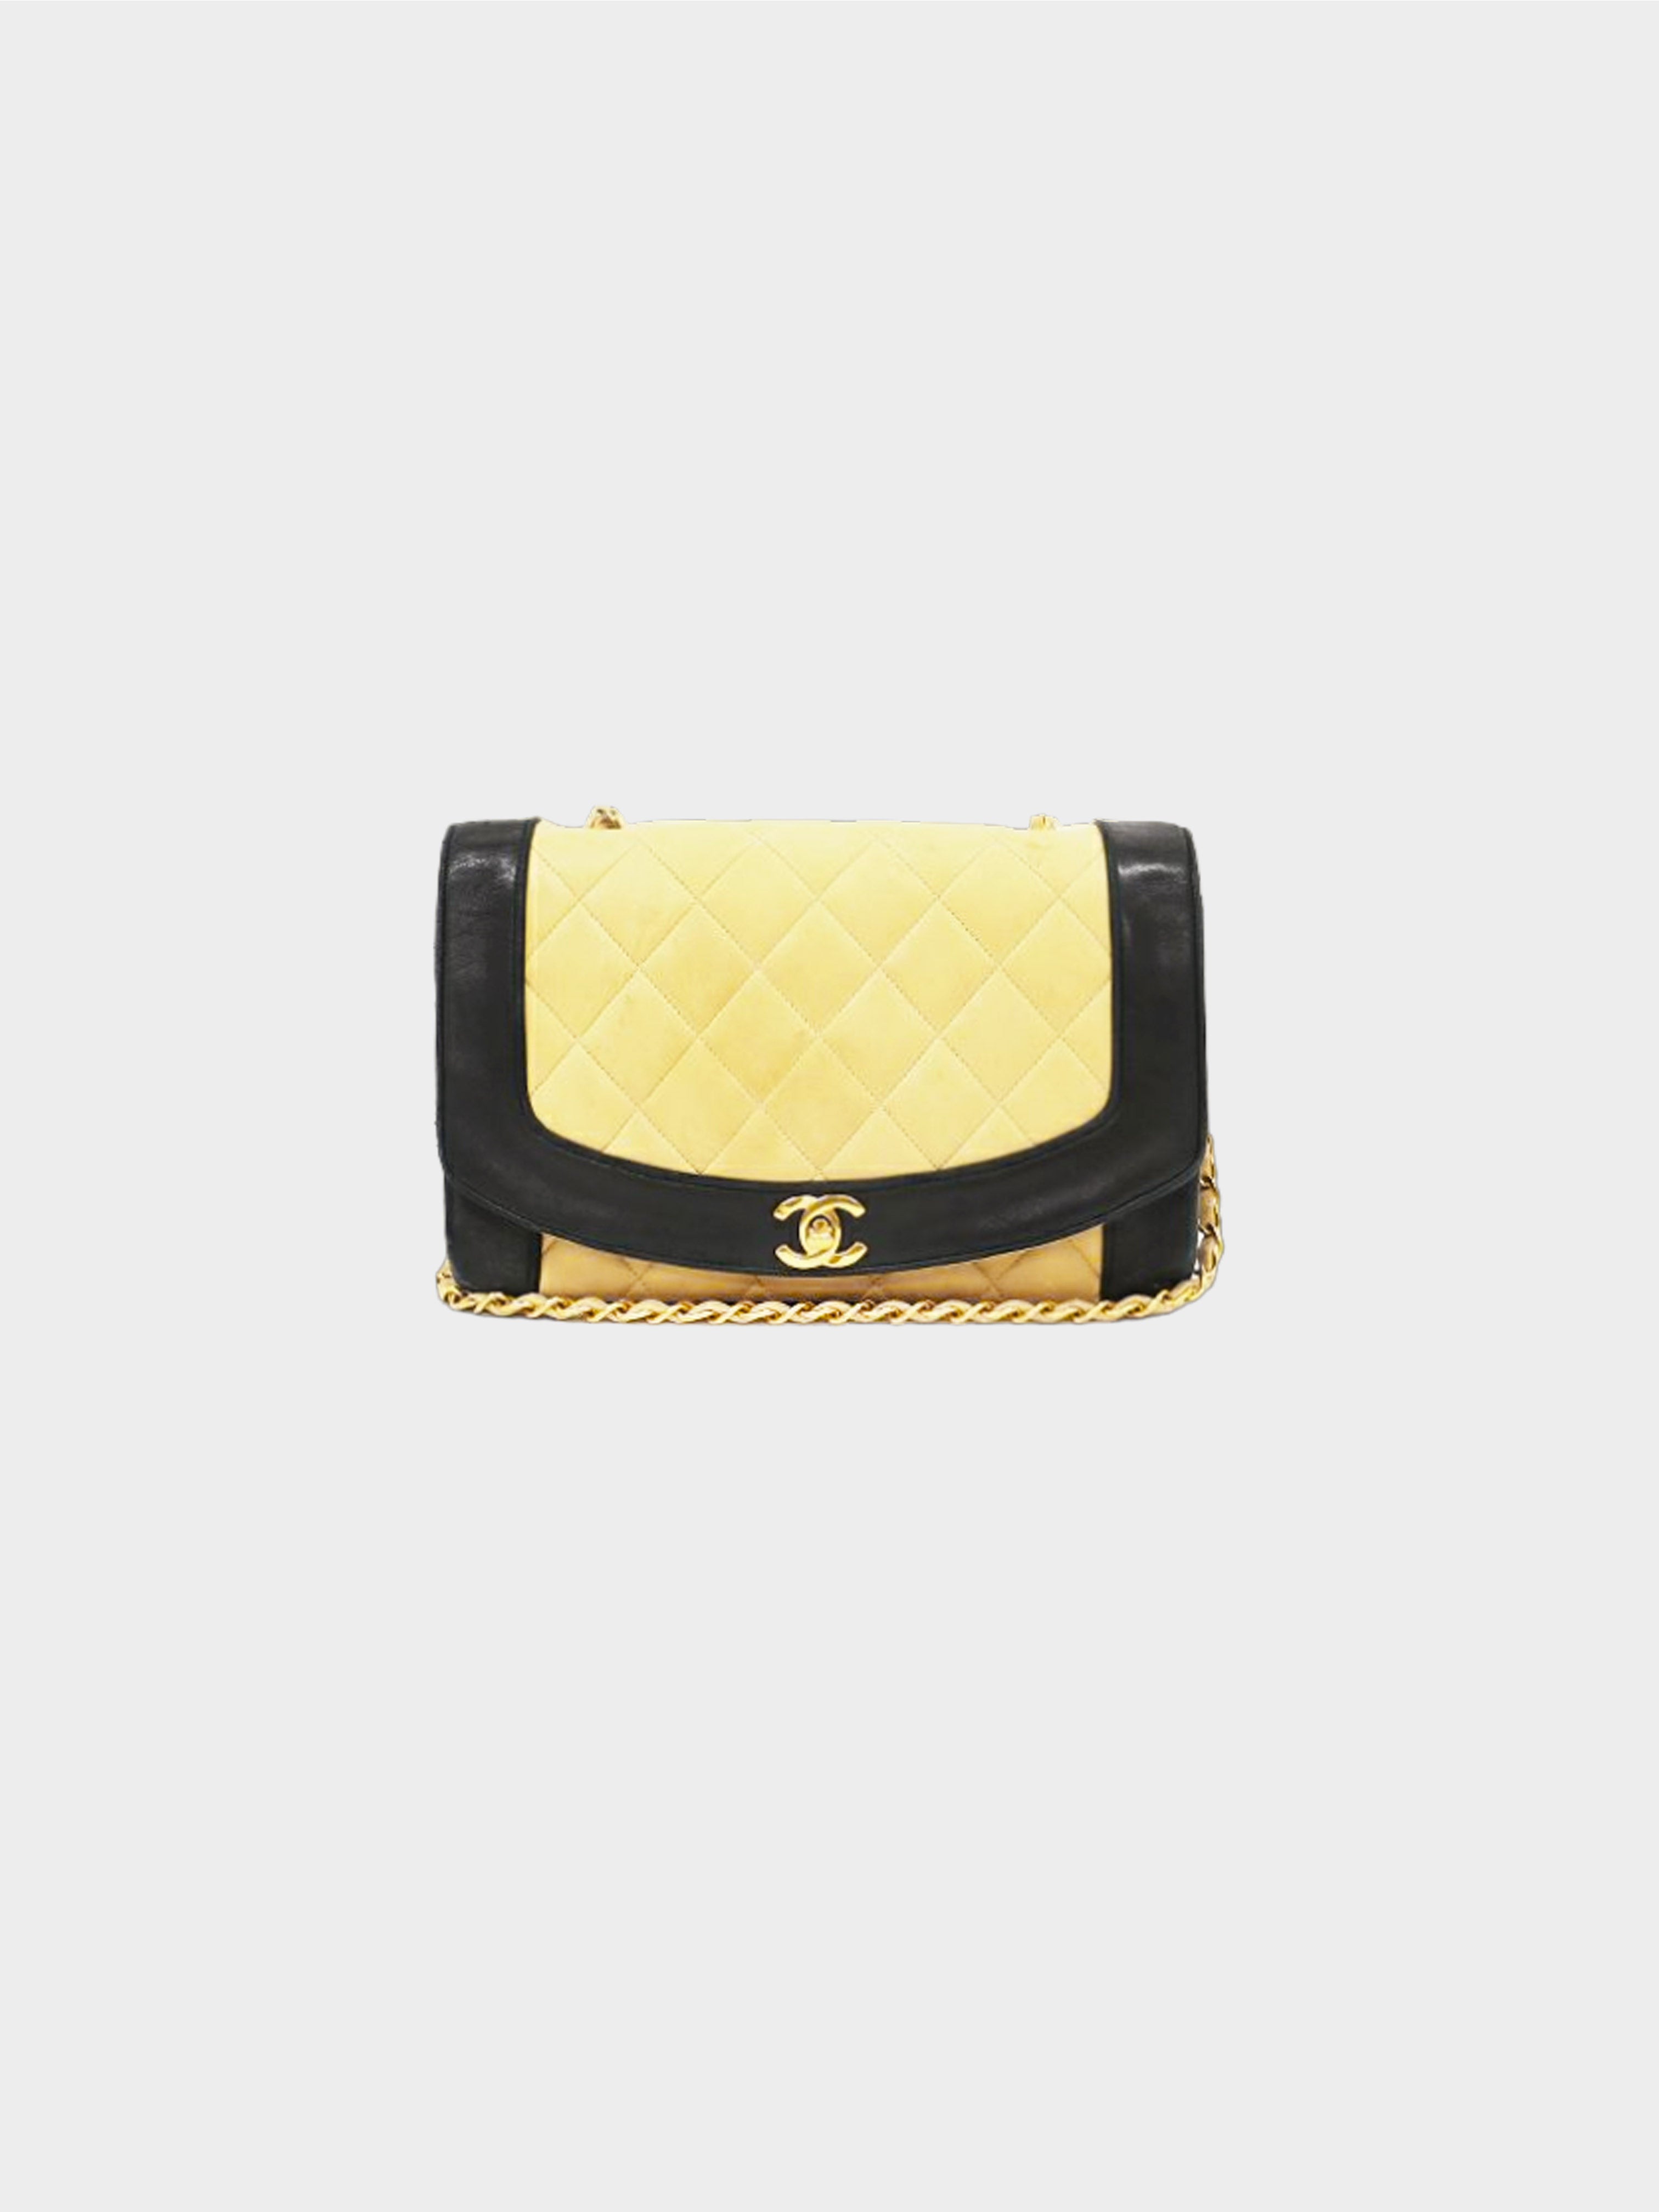 Diana patent leather crossbody bag Chanel Black in Patent leather